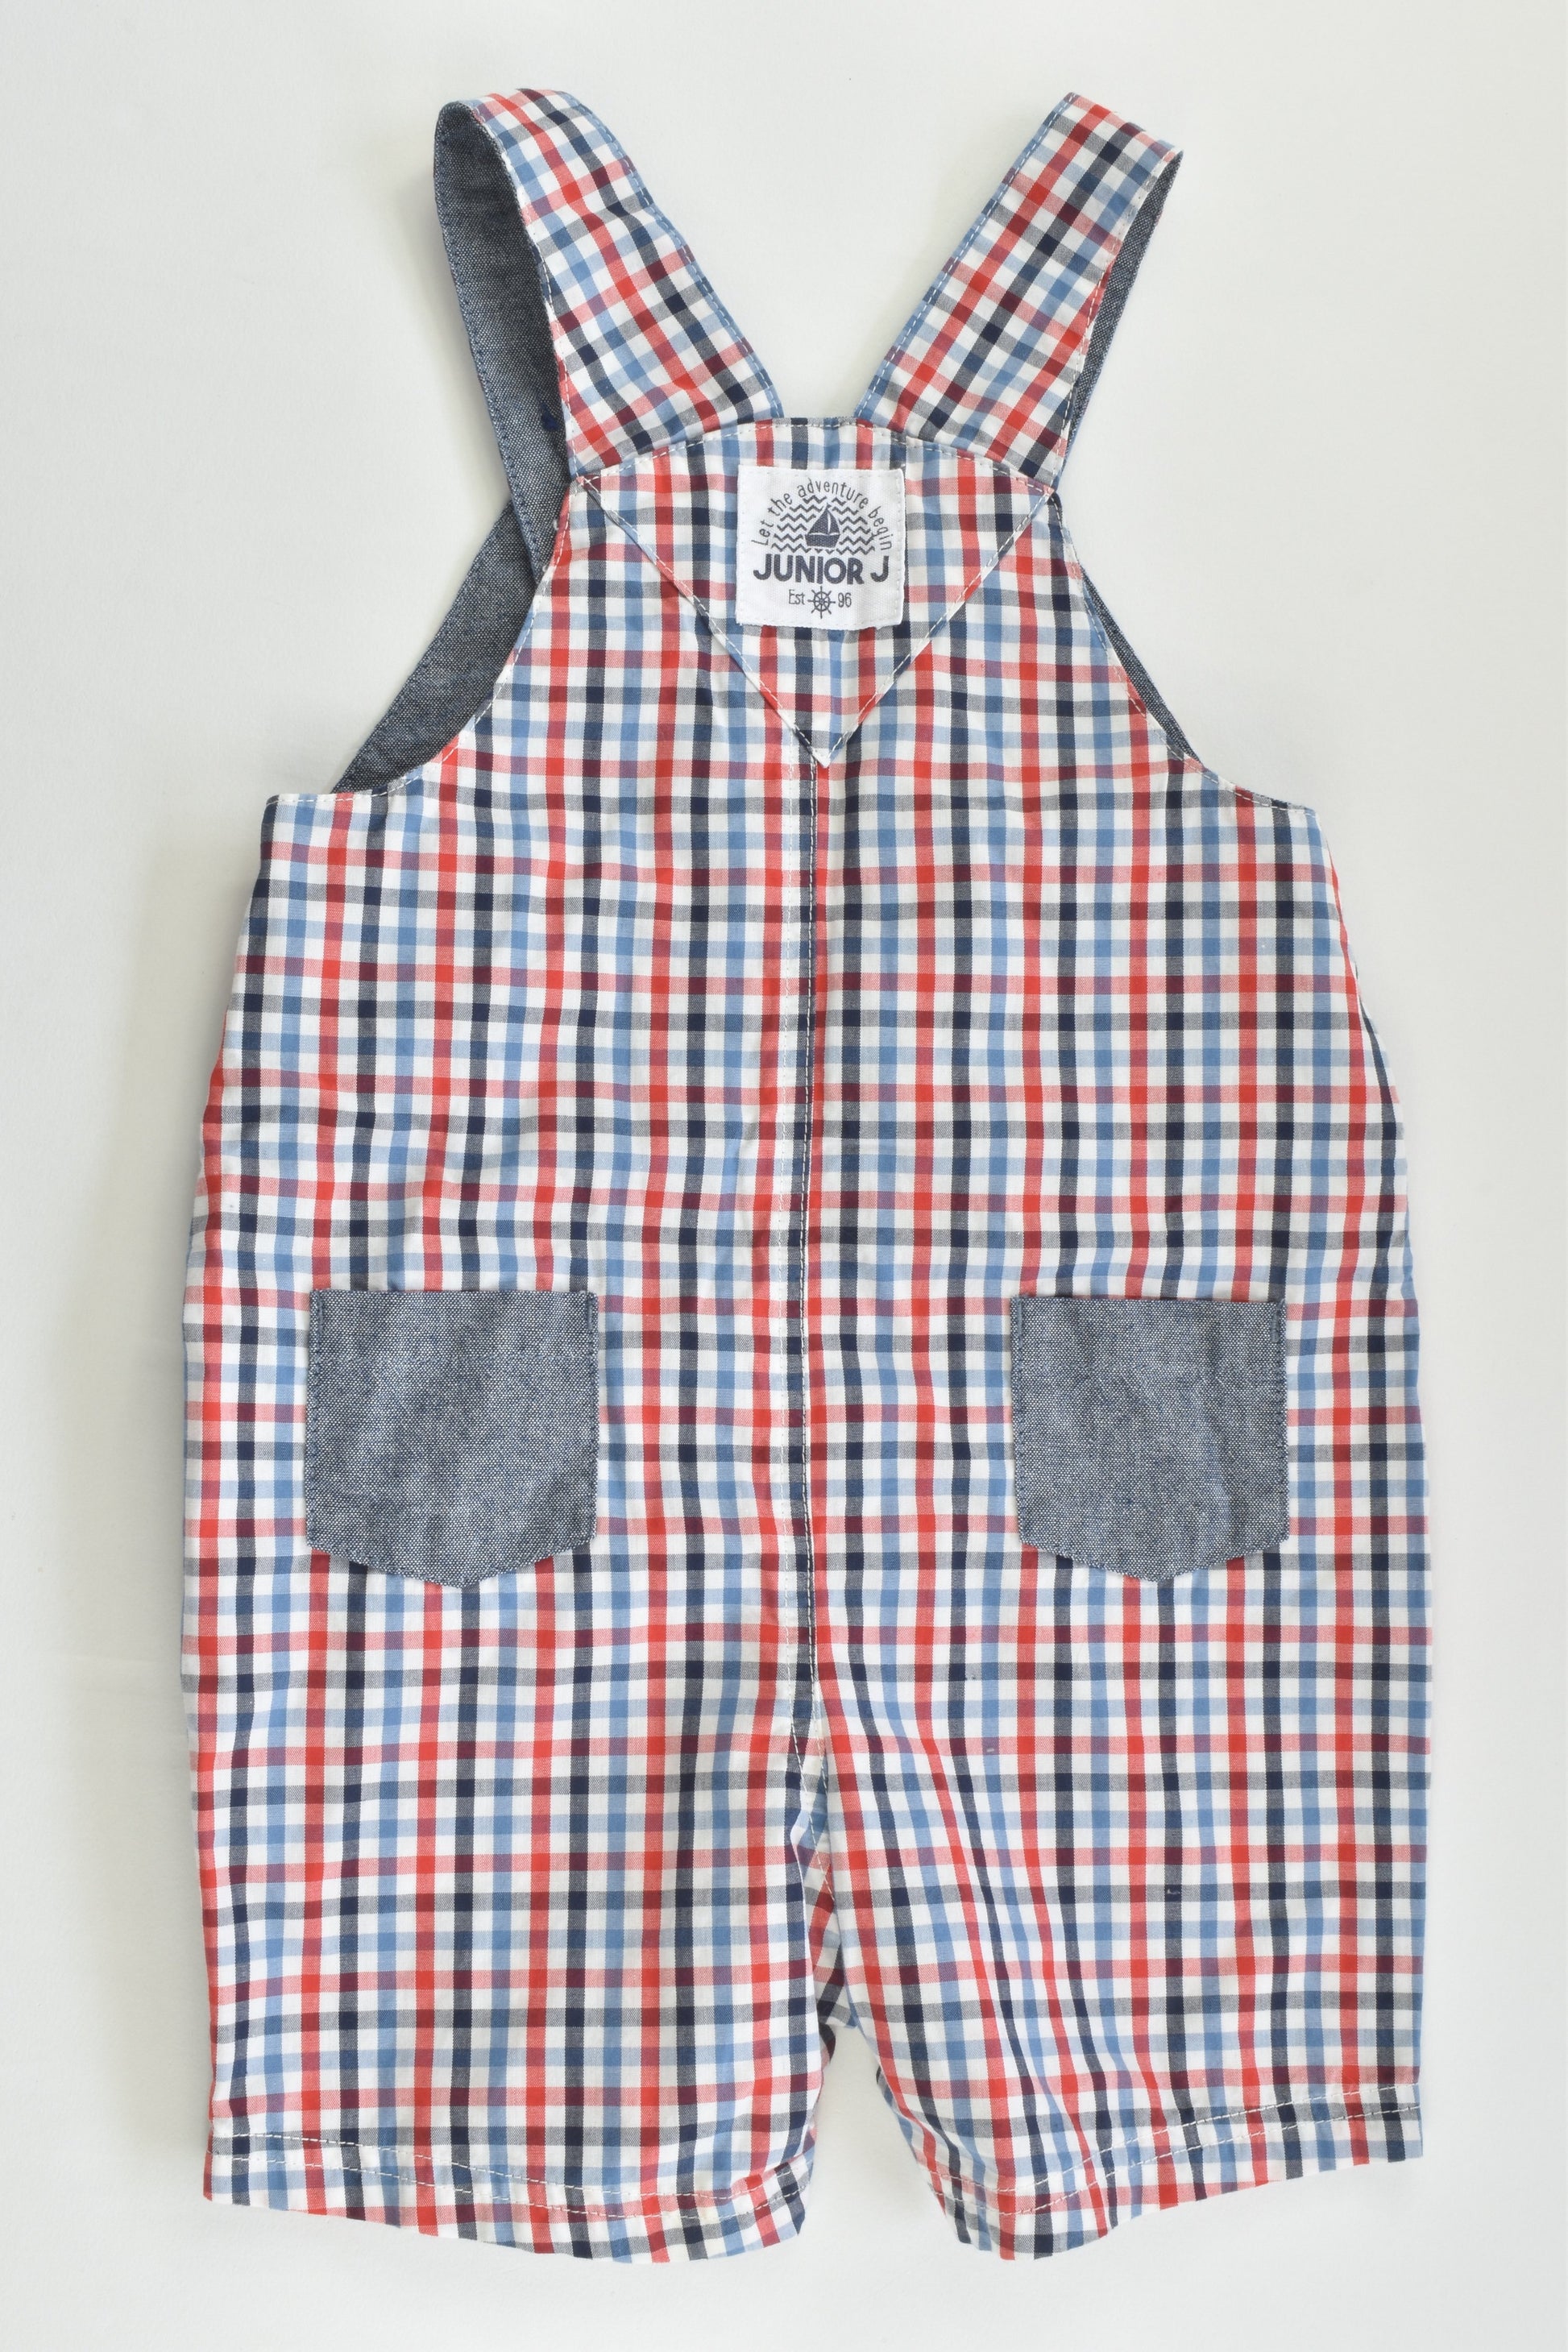 Junior J by Debenhams Size 00 (3-6 months) Checked 'Let The Adventure Begin' Short Overalls